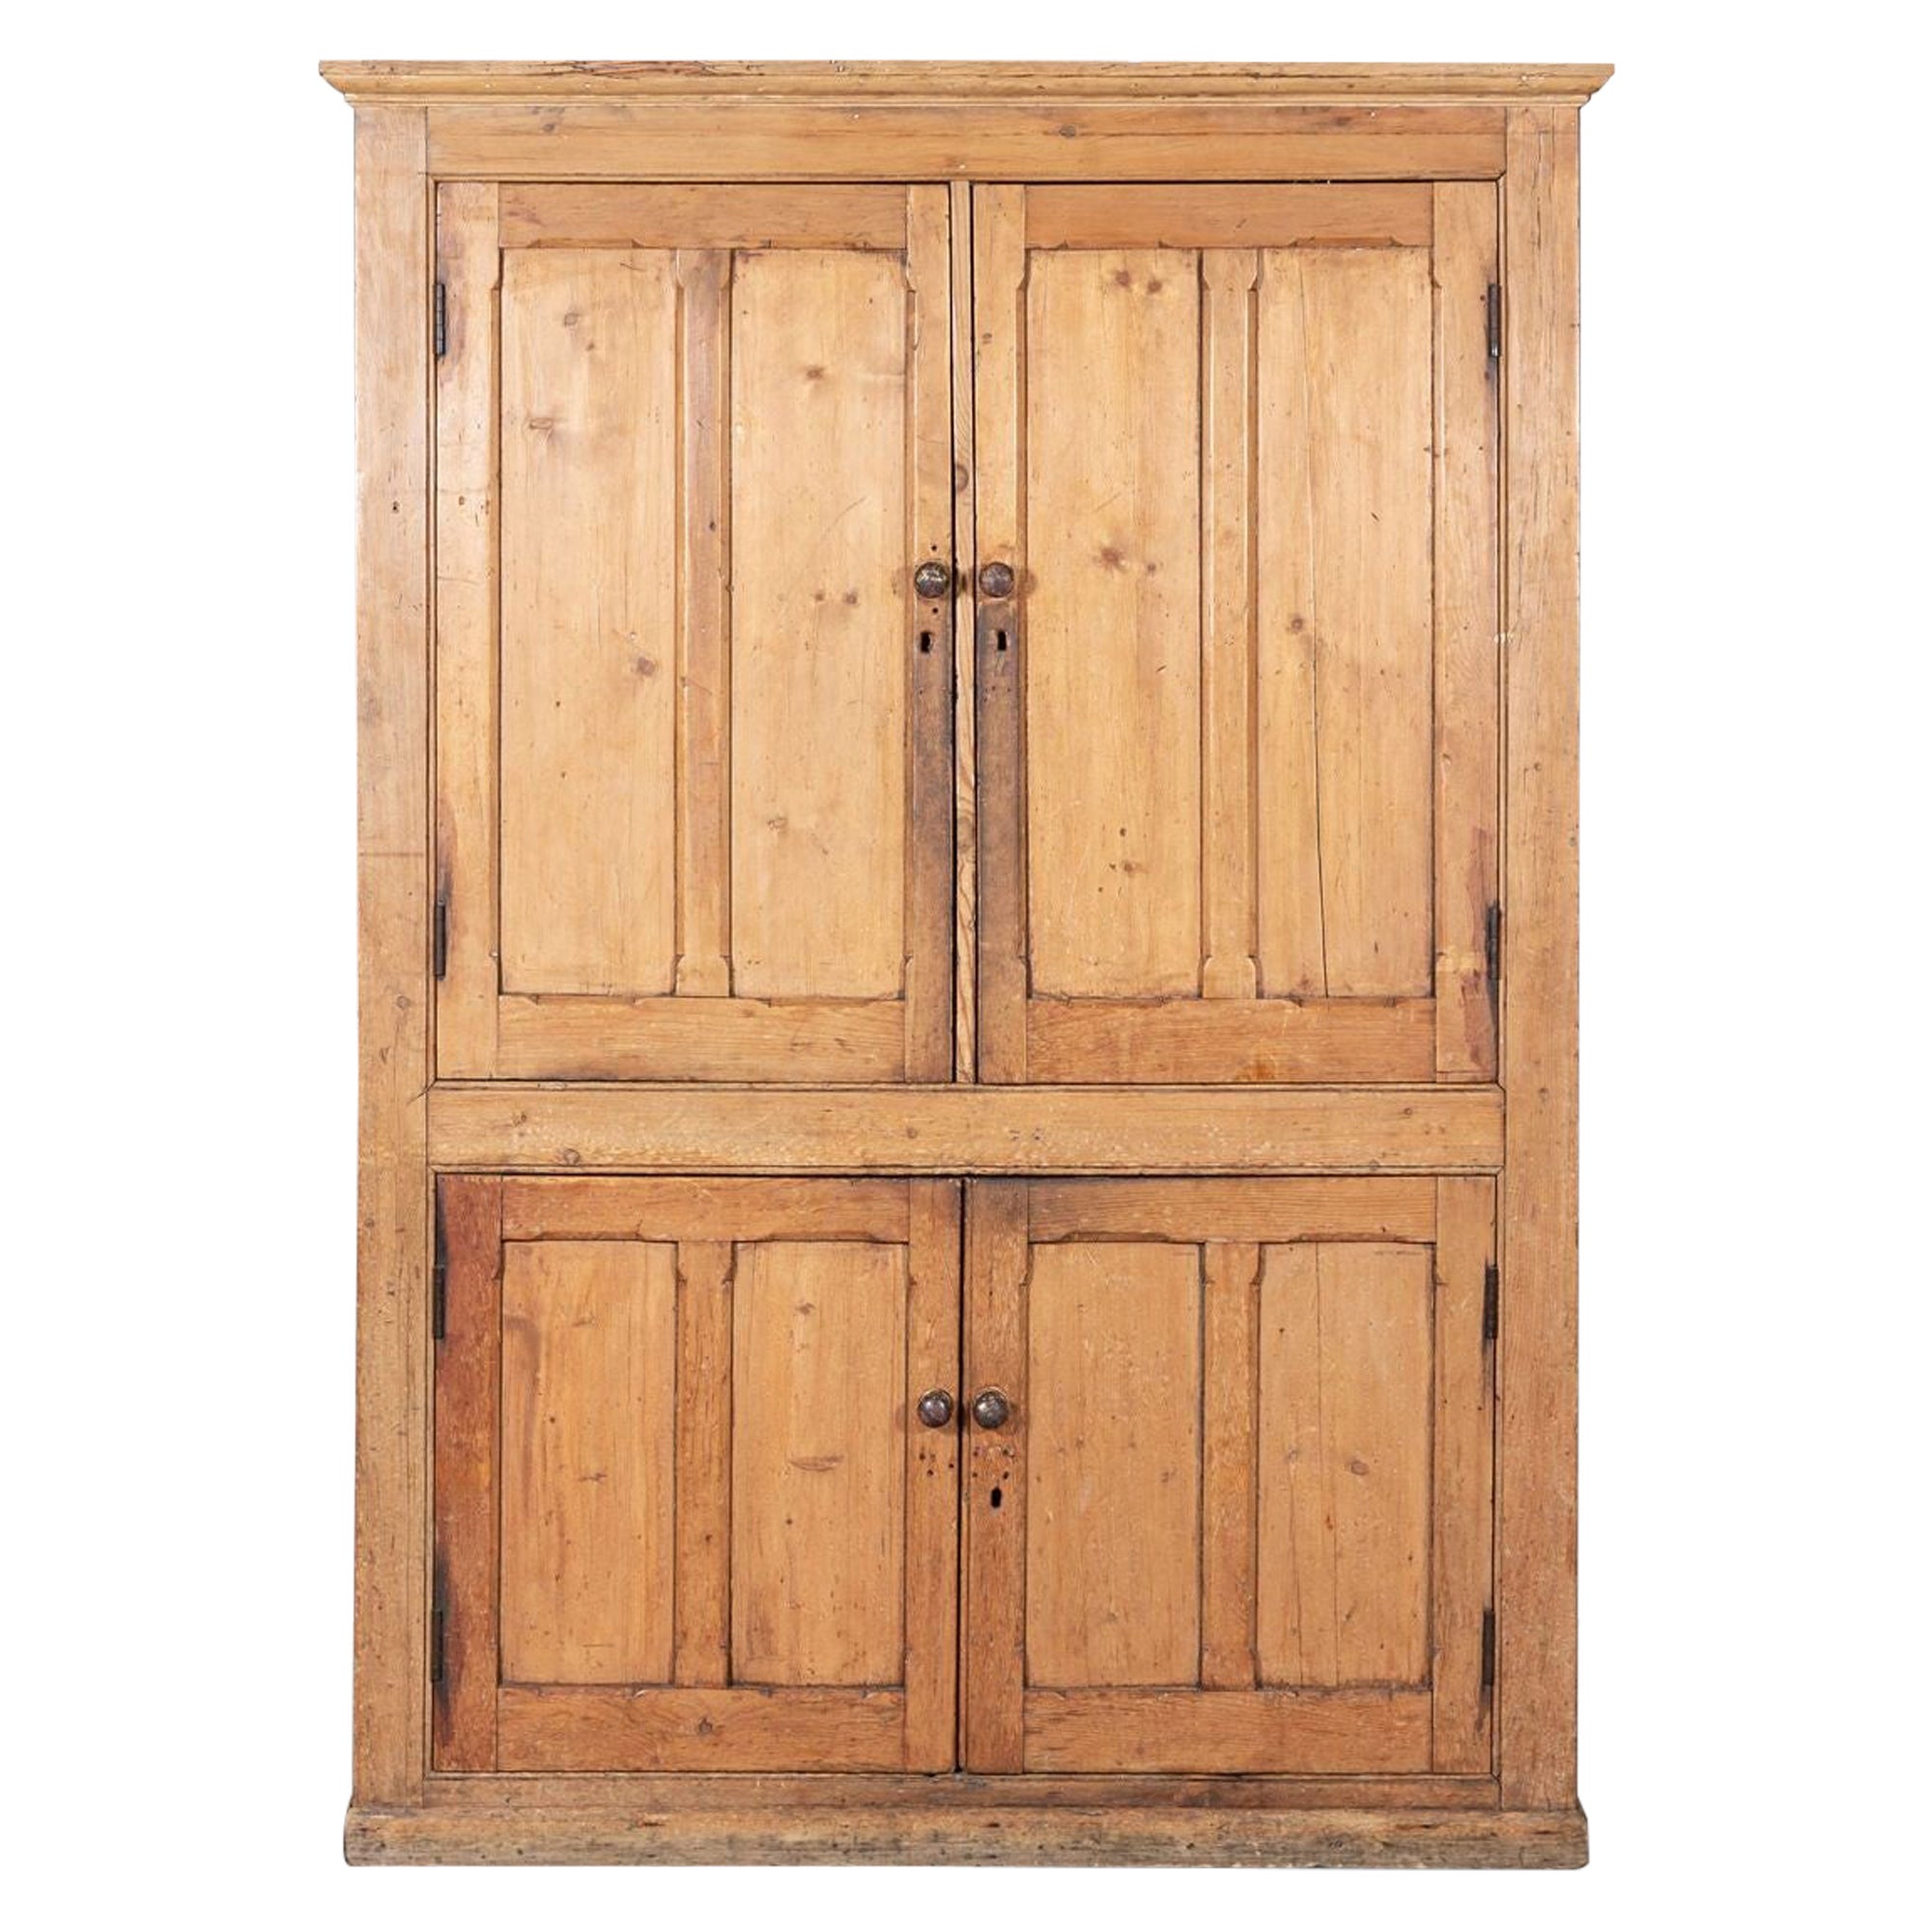 Large 19thC English Pine Housekeepers Cupboard